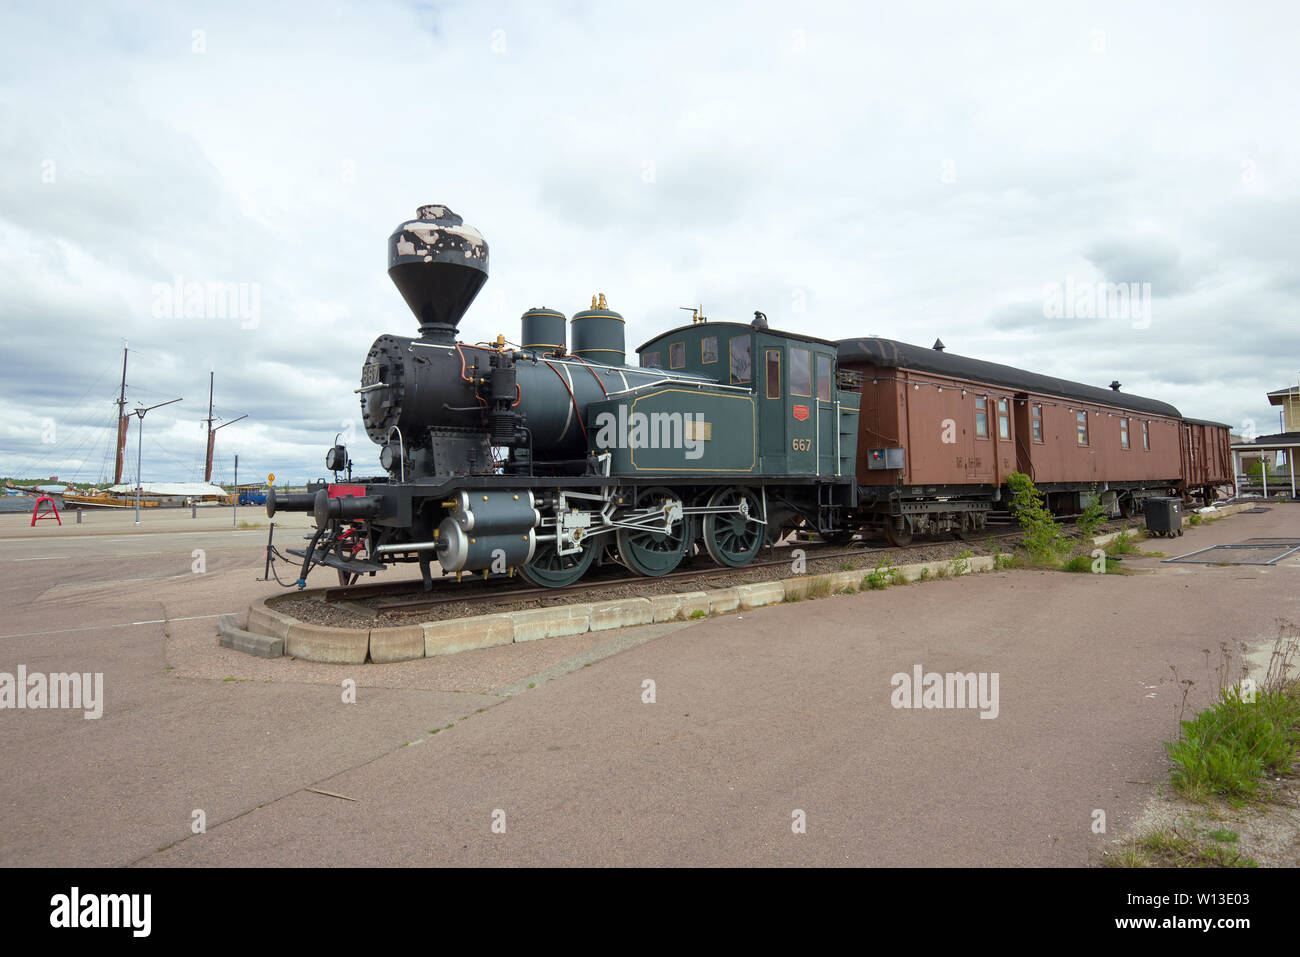 KOTKA, FINLAND - JUNE 03, 2017: Retro steam locomotive Vr1 (until 1942 - L1) with wagons in the sea center of Vellamo on a cloudy day Stock Photo